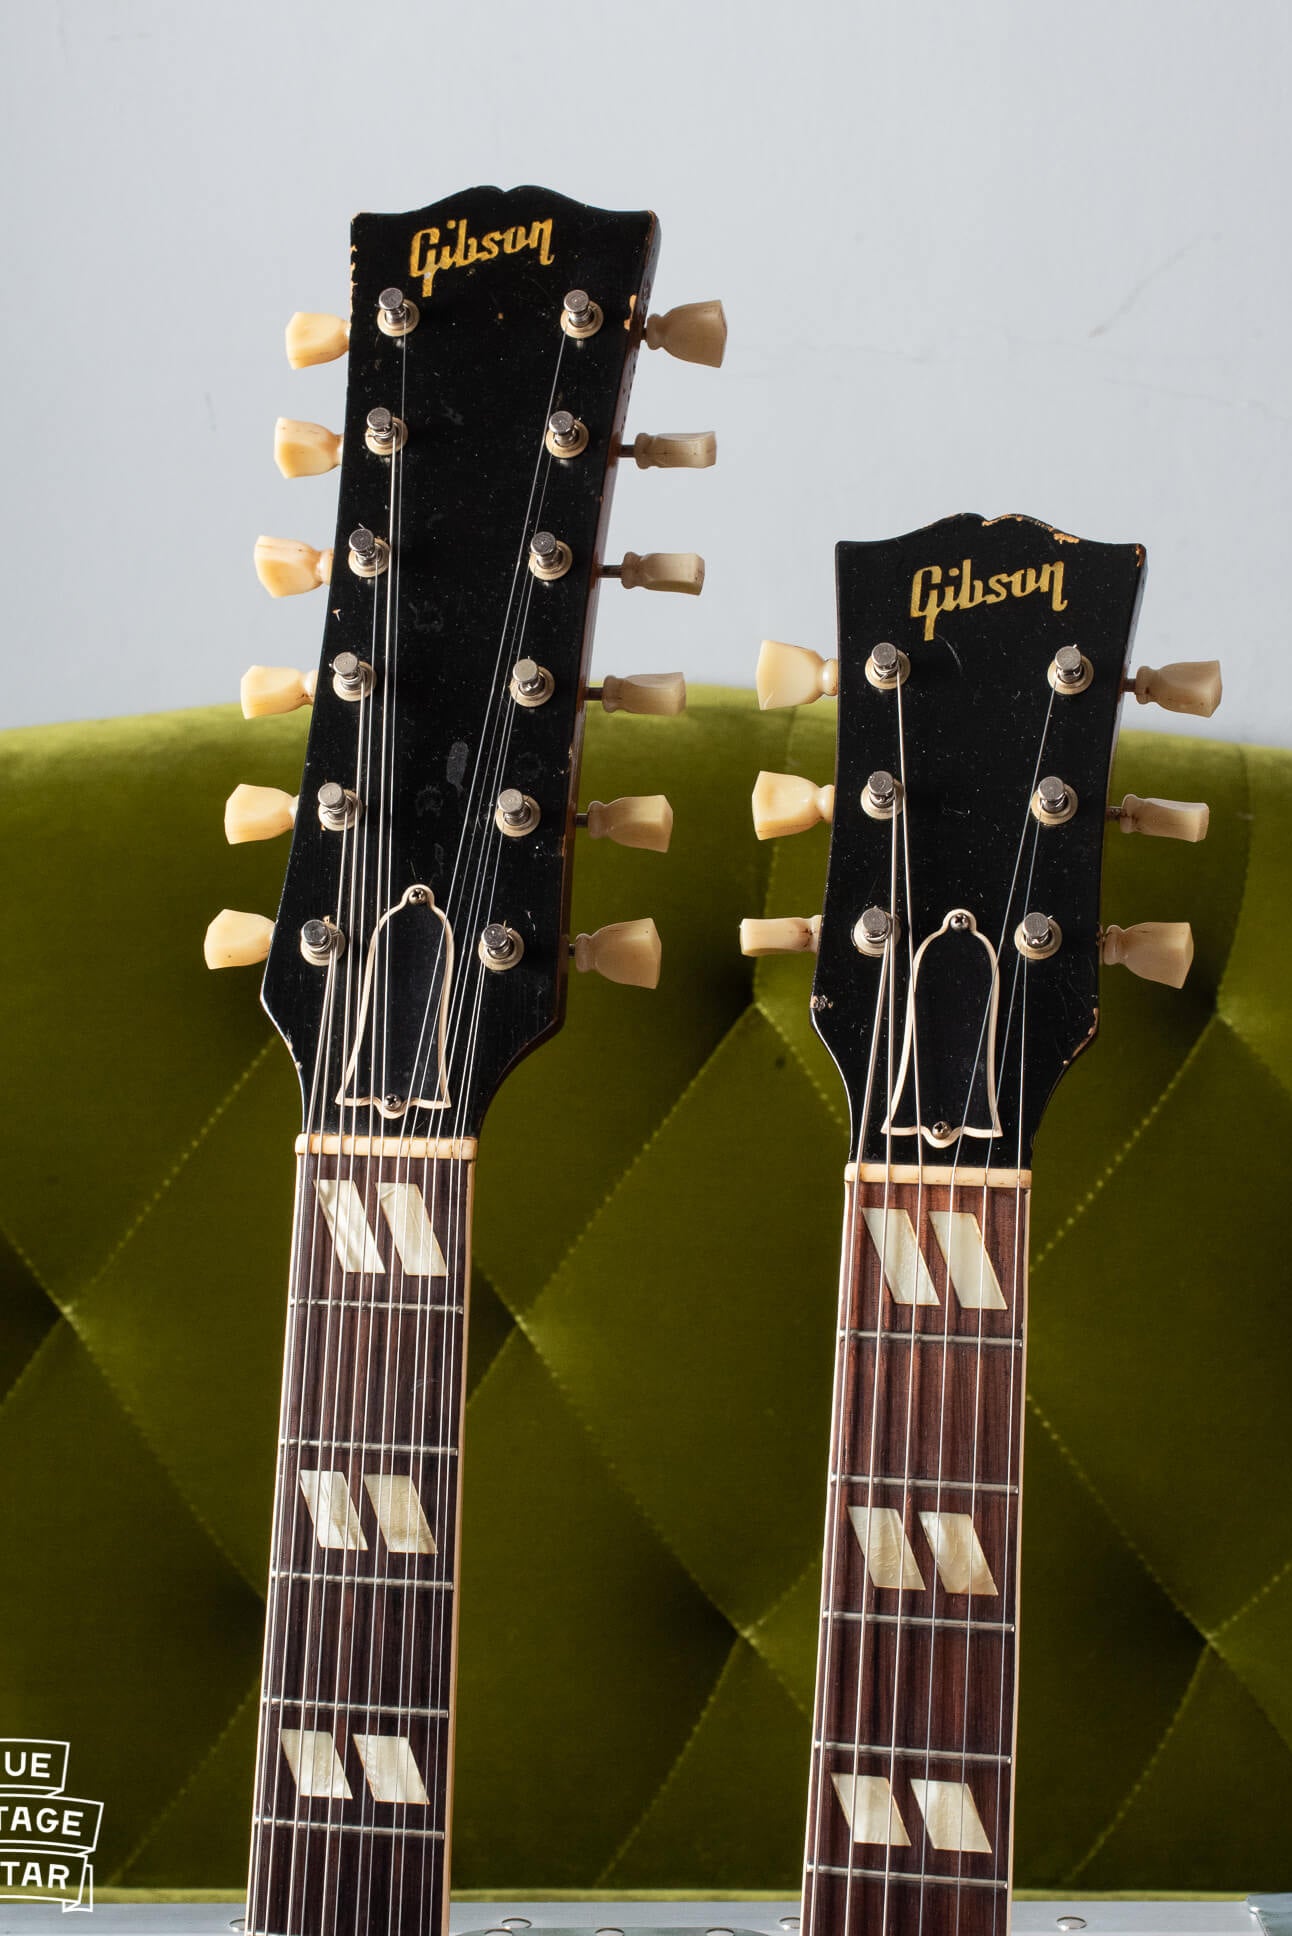 double neck headstocks 1959 Gibson with 12 string and six string necks